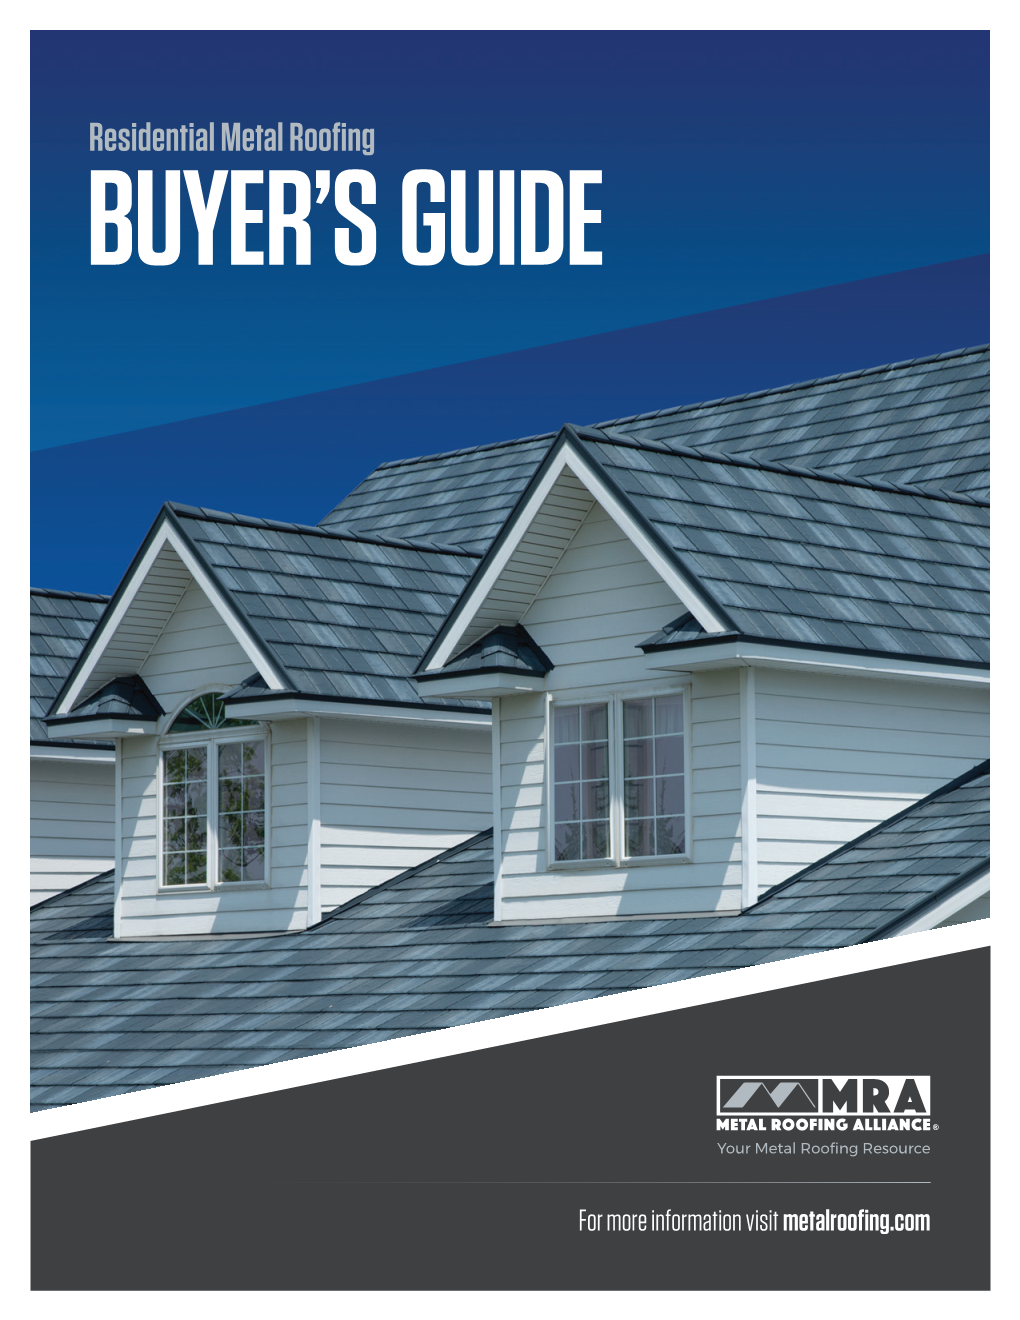 Residential Metal Roofing BUYER's GUIDE